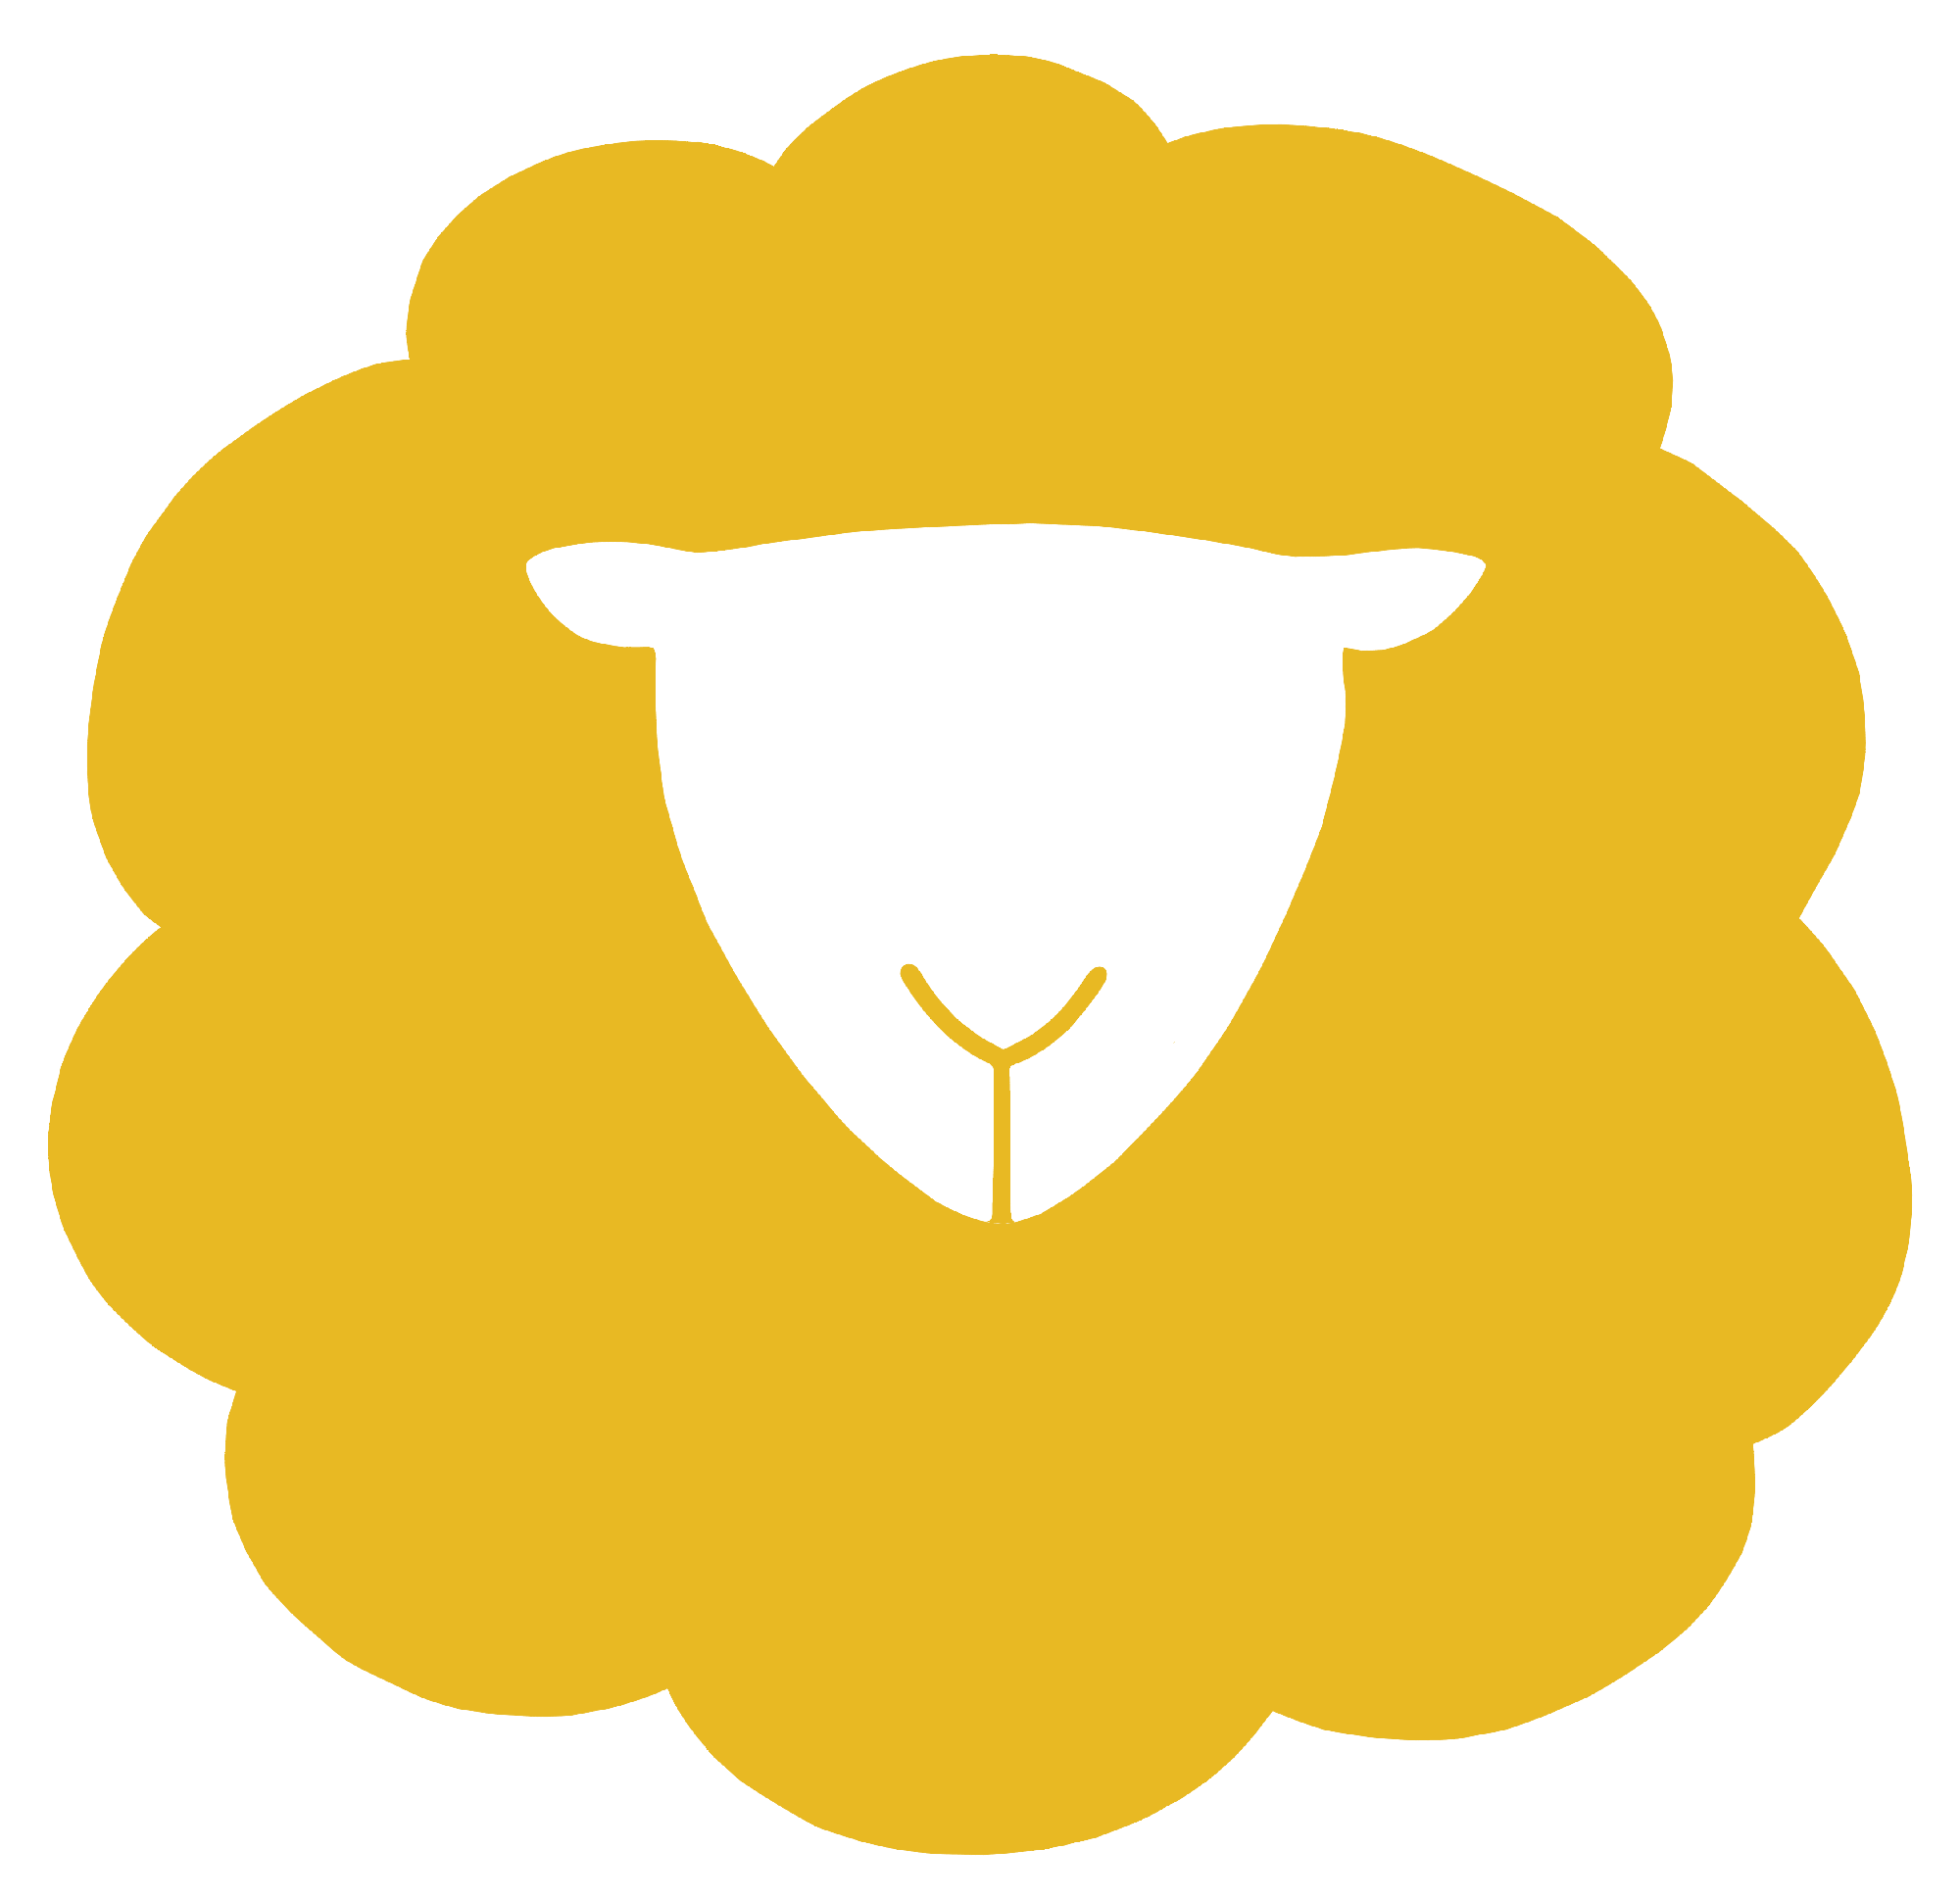 image of a little yellow sheep with a white head